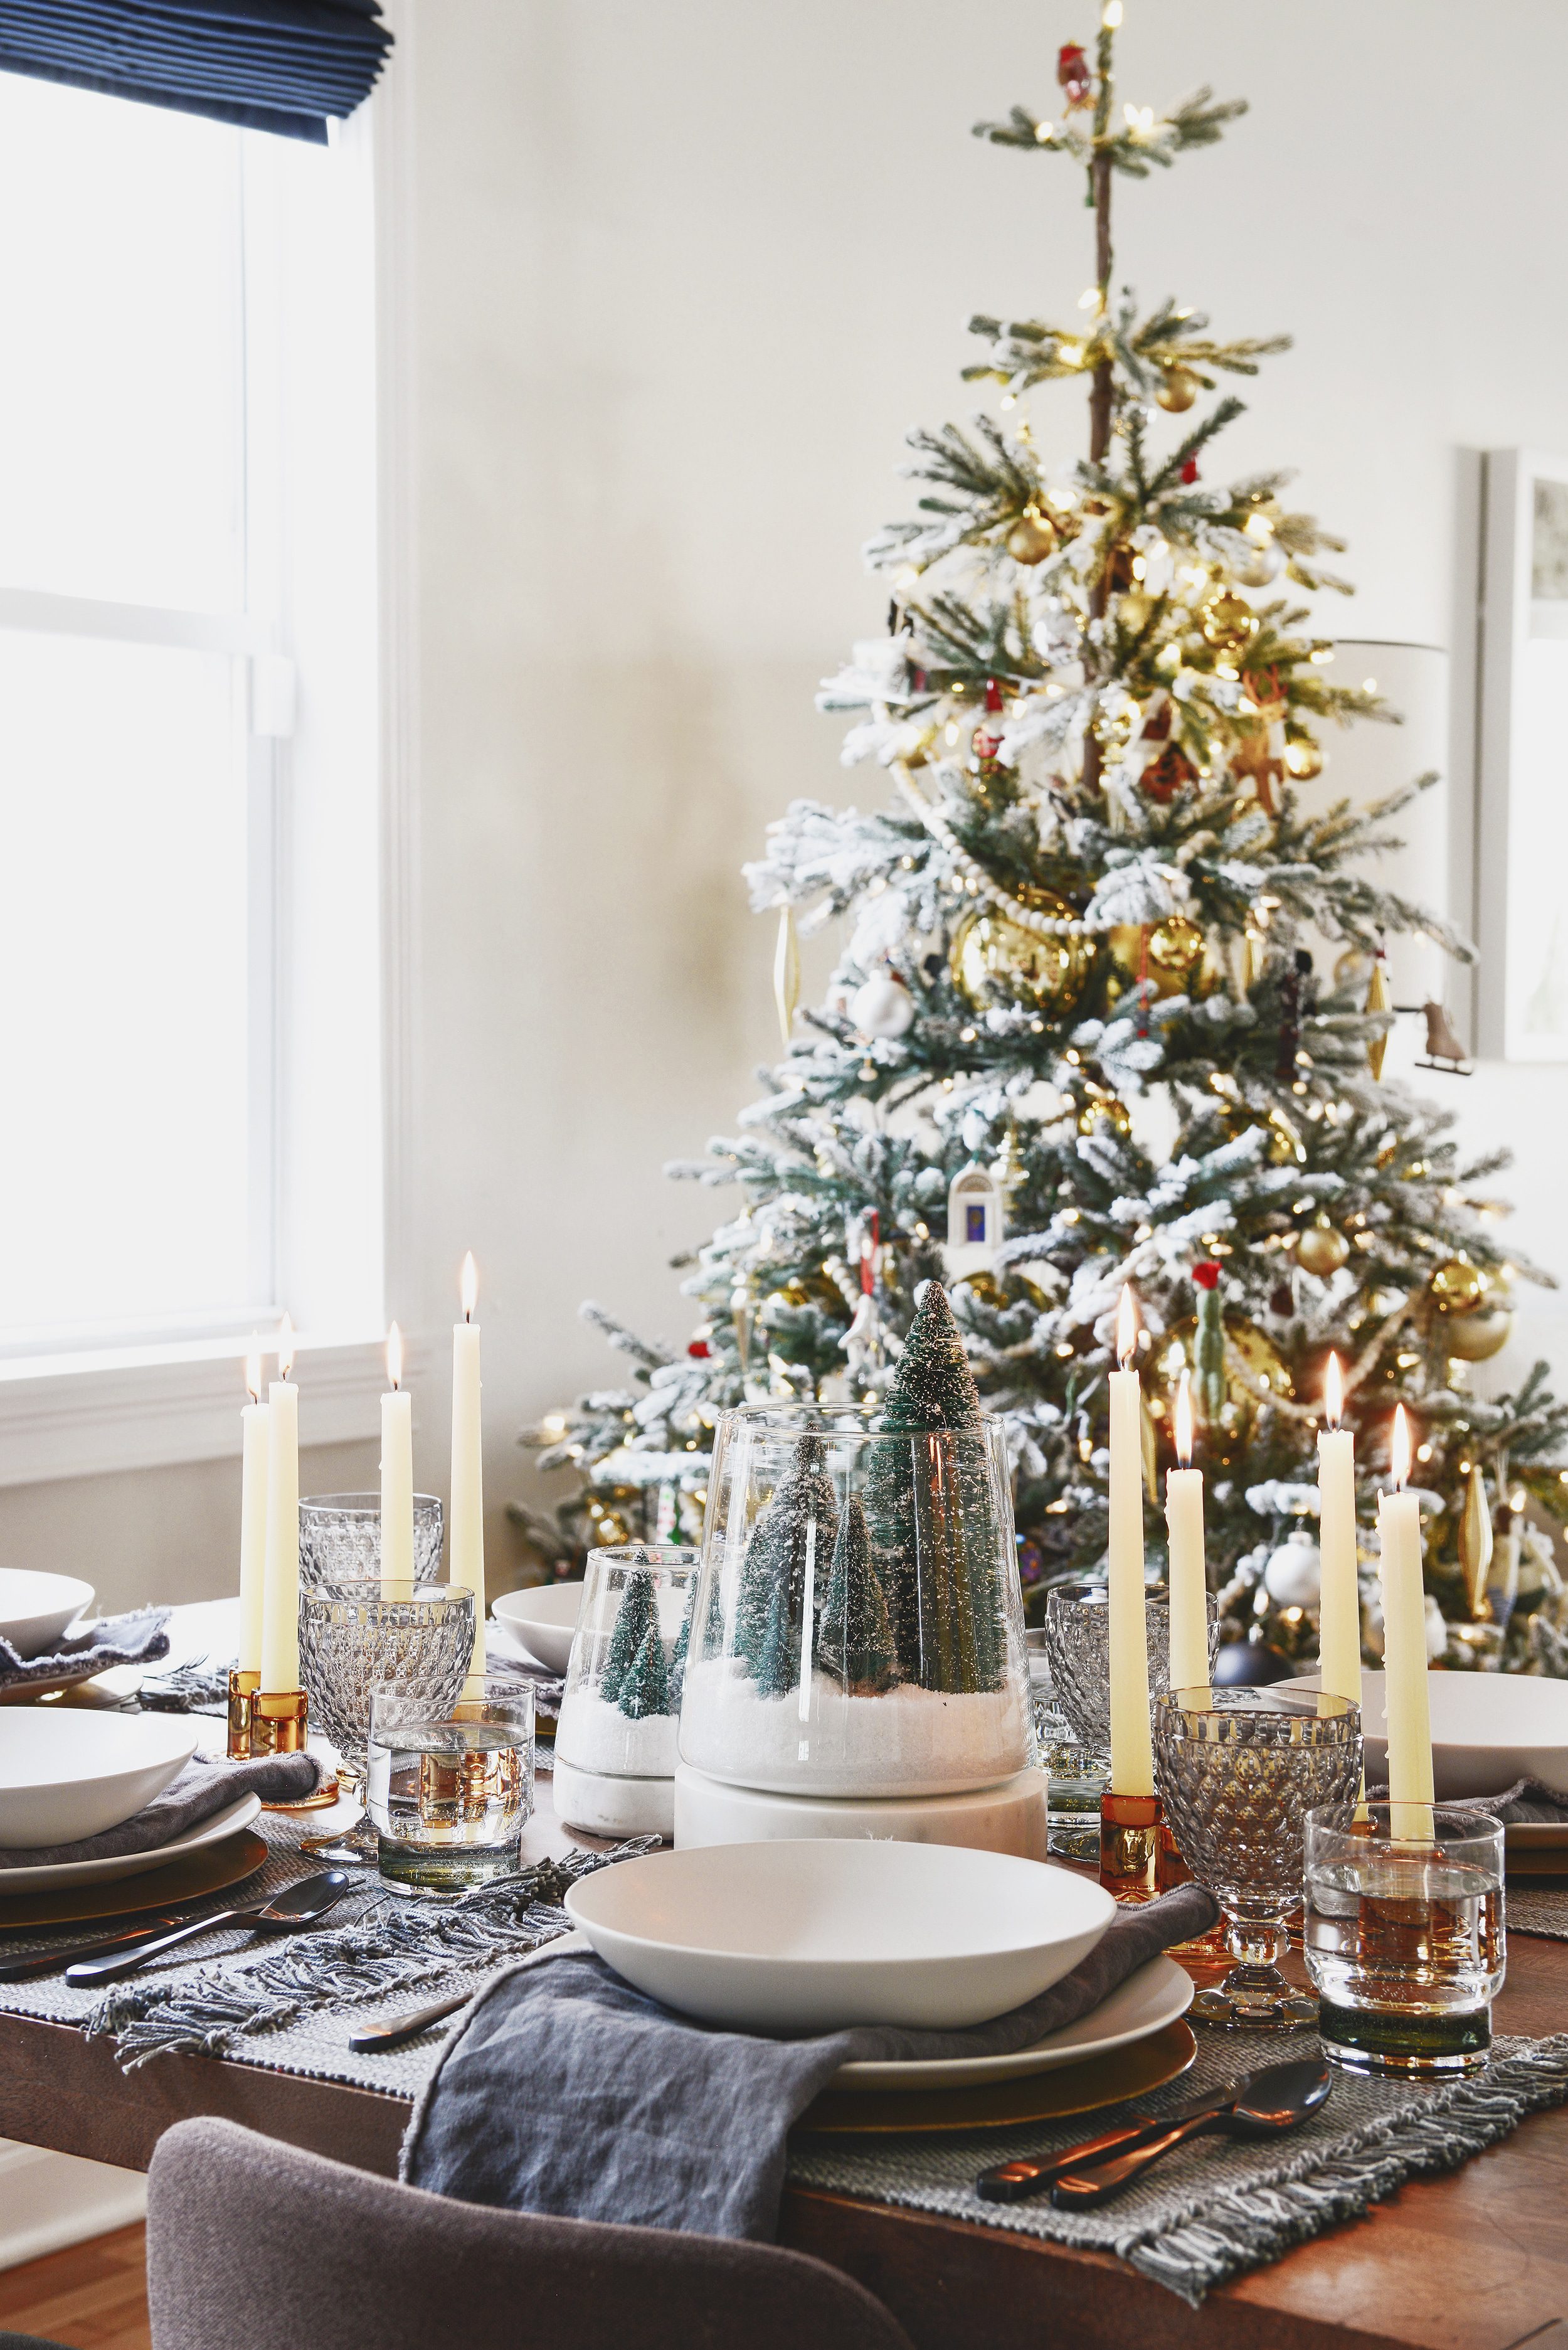 A holiday table setting in shades of grey, amber and white and a Christmas tree in the background | This holiday season, consider simplifying your table setting with these 5 fresh styling tips! | via Yellow Brick Home